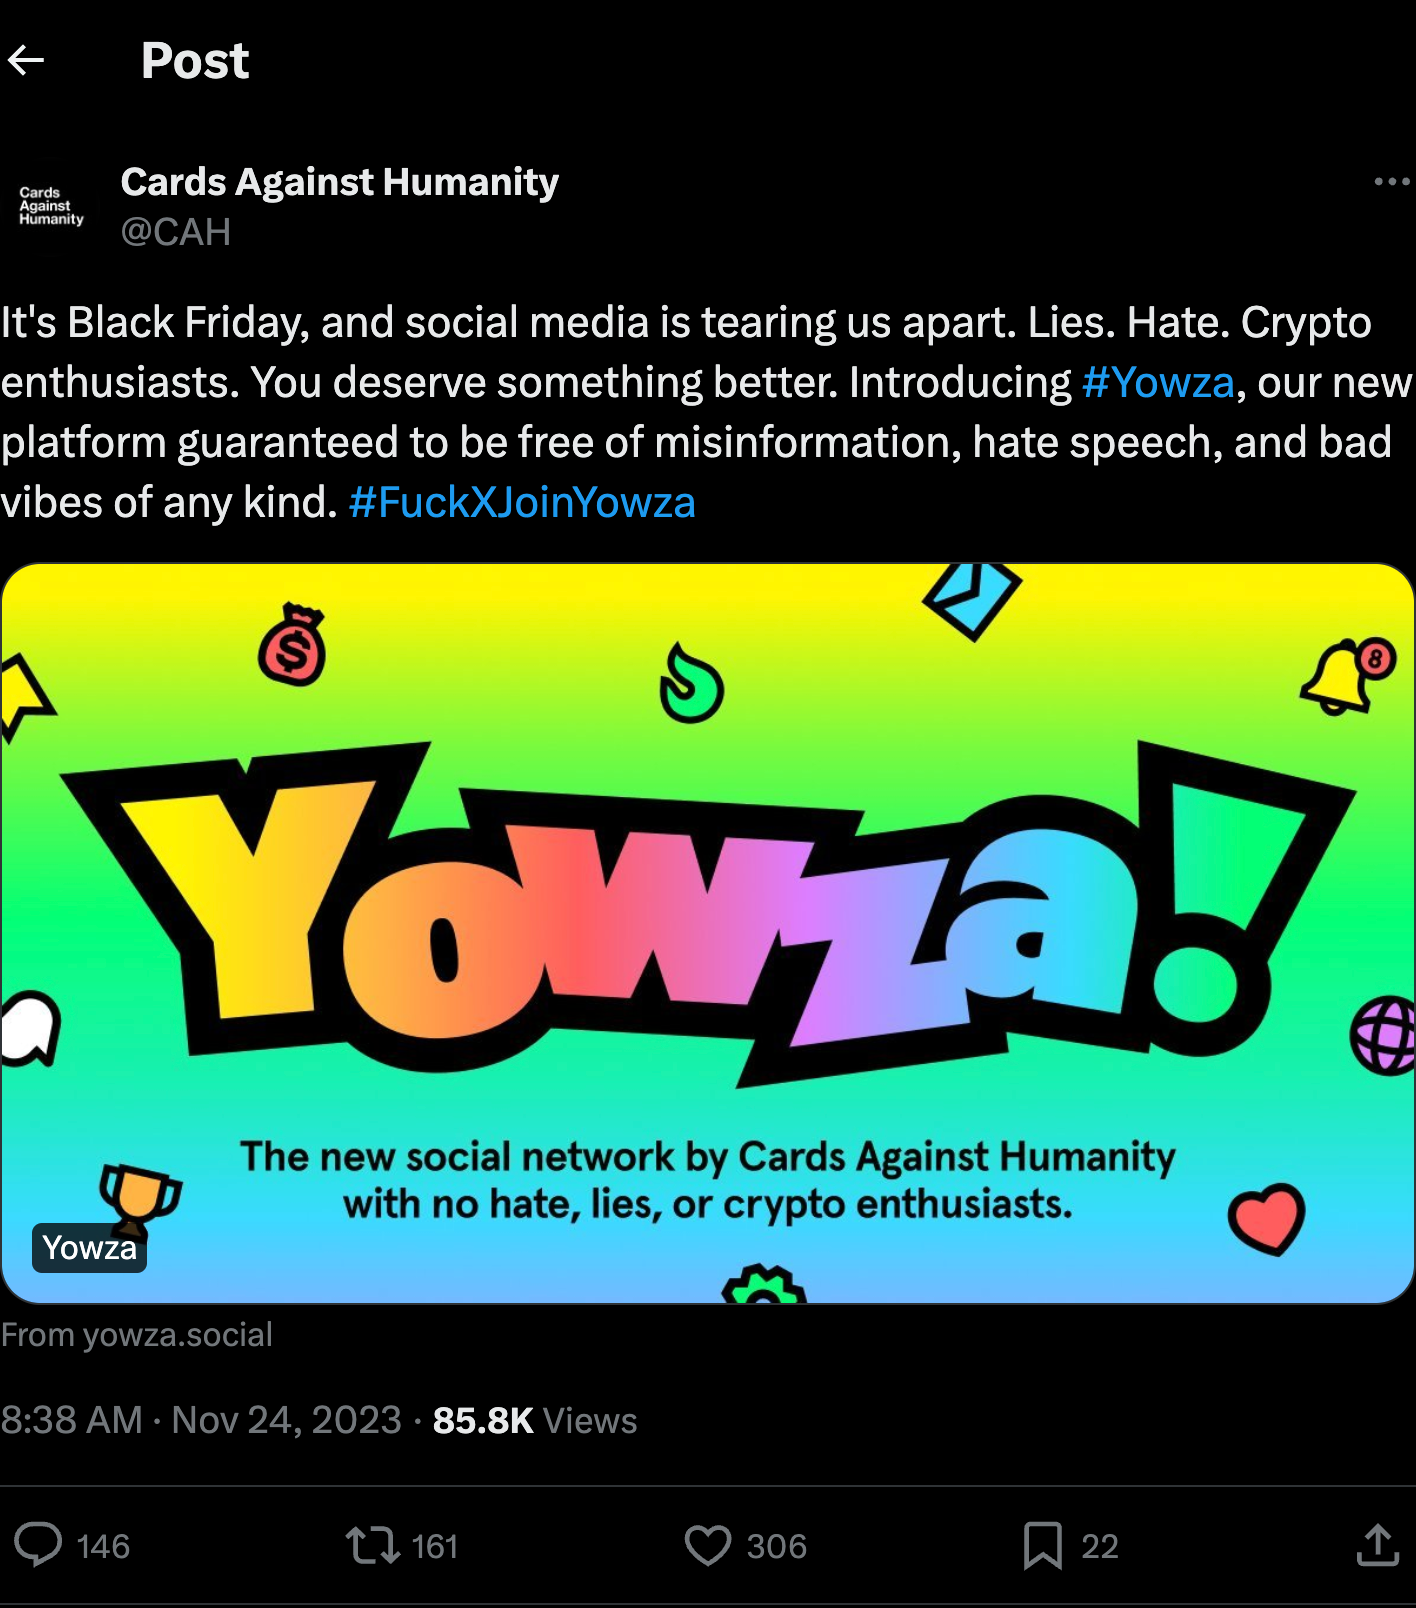 A tweet from the Cards Against Humanity Twitter account, which says 'It's Black friday, and social media is tearing us apart. Lies. Hate. Crypto enthusiasts. You deserve something better. Introducing #Yowza, our new platform guaranteed to be free of misinformation, hate speech and bad vibes of any kind. #FuckXJoinYowza'